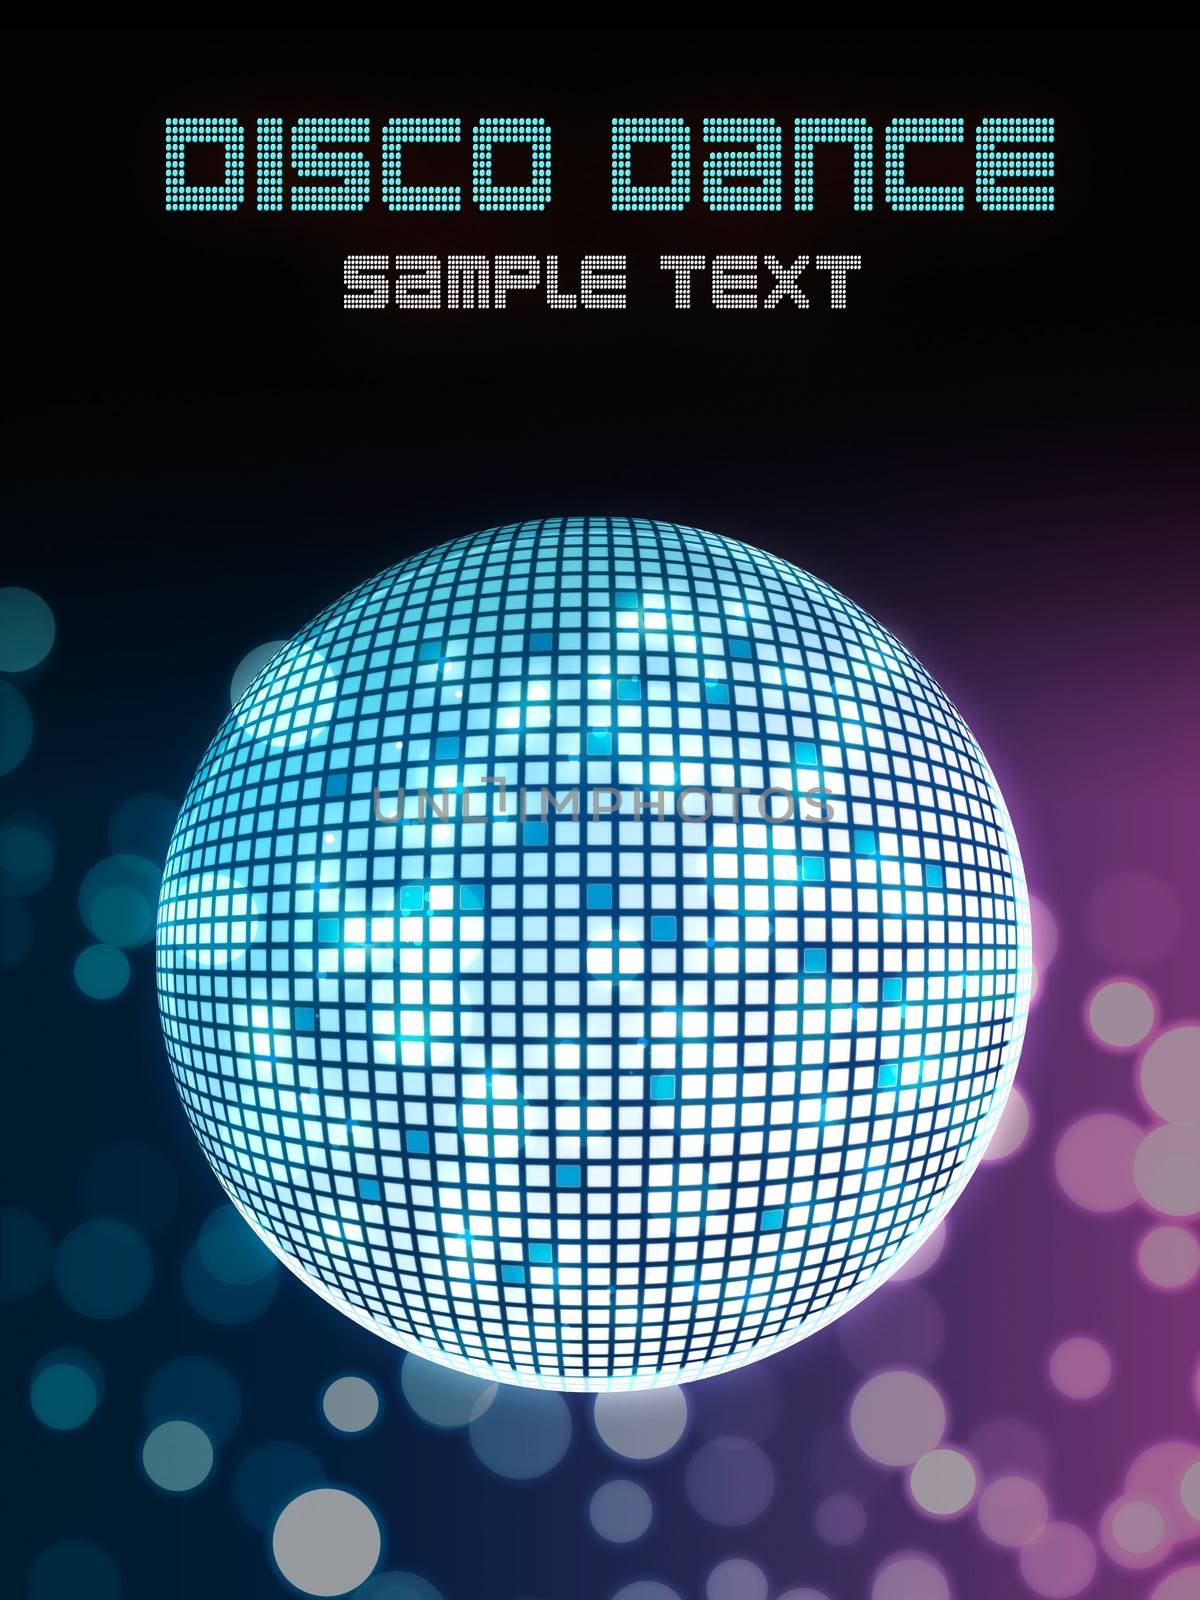 Disco ball poster background for party event